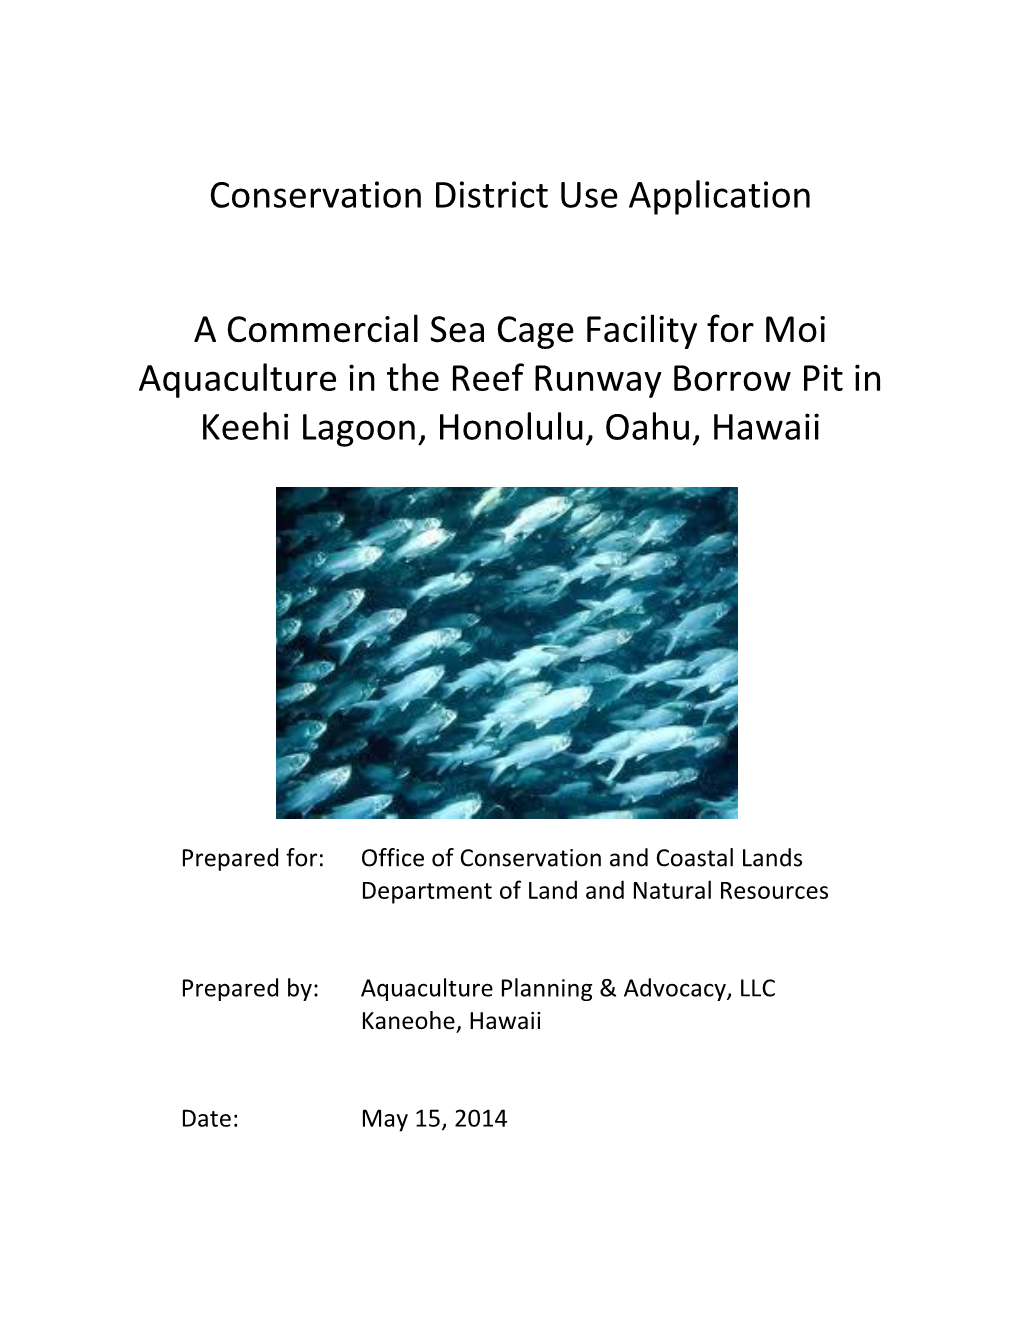 Conservation District Use Application a Commercial Sea Cage Facility for Moi Aquaculture in the Reef Runway Borrow Pit in Keehi